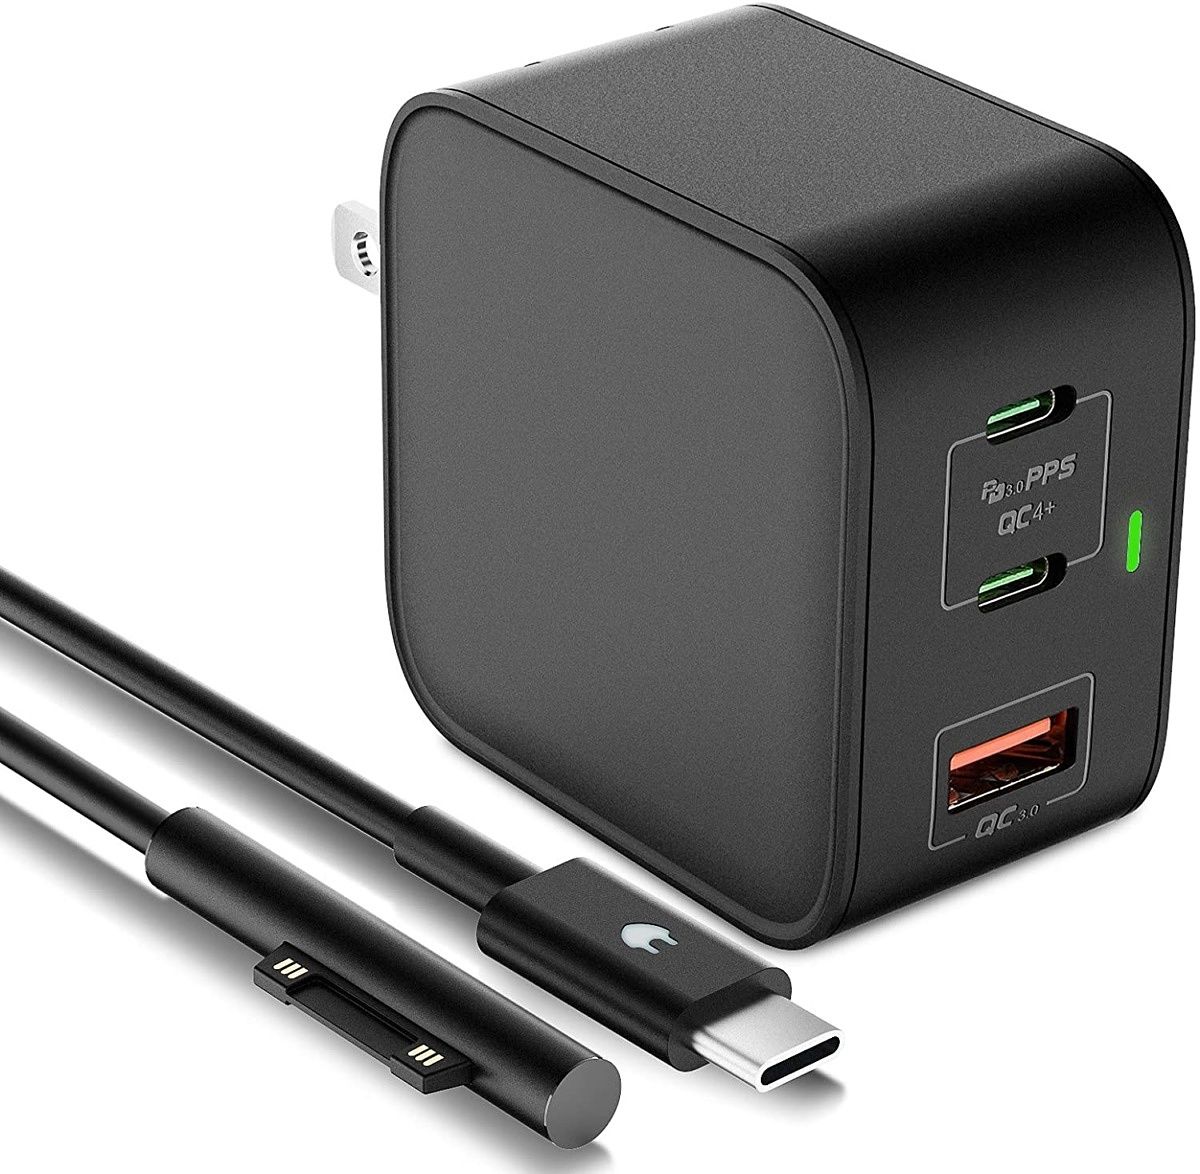 If you want to charge your Surface Go 3 and other devices, this 65W charger from TOMSENN is a great option. It has standard USB ports, but includes a Surface Connect cable, so you can charge your Surface Go 3 magnetically and plug in other USB chargers.